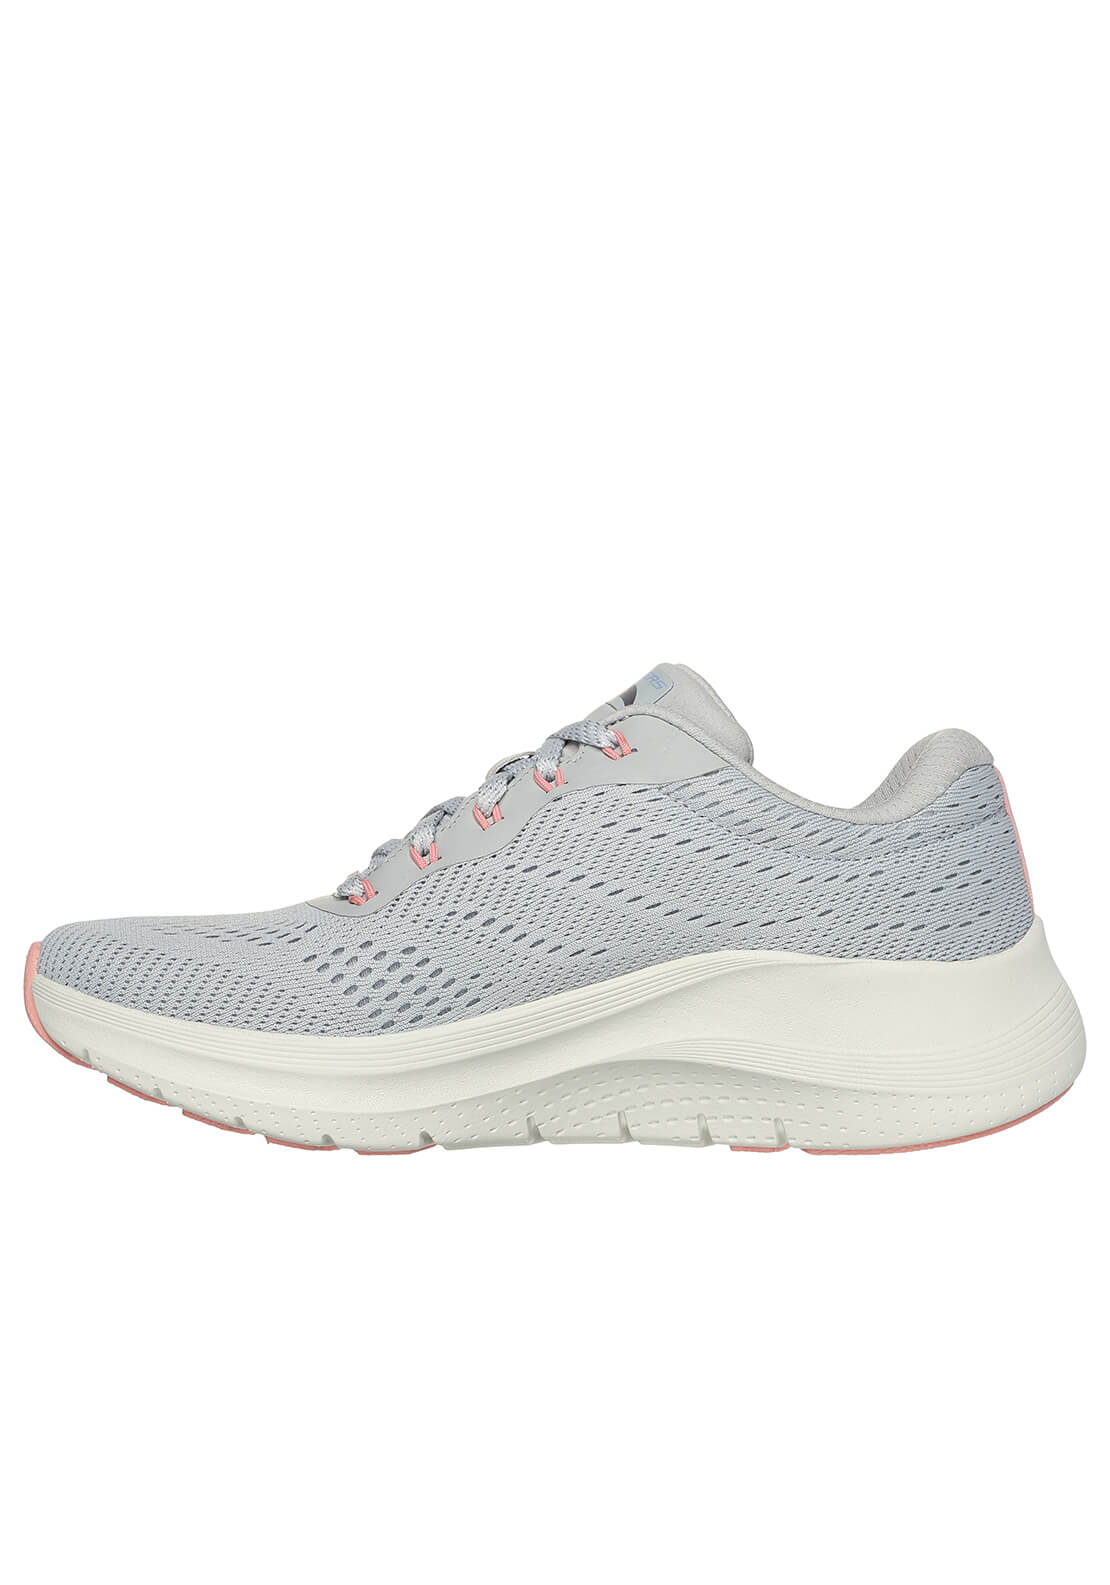 Skechers Arch Fit 2.0 Big League - Grey 2 Shaws Department Stores